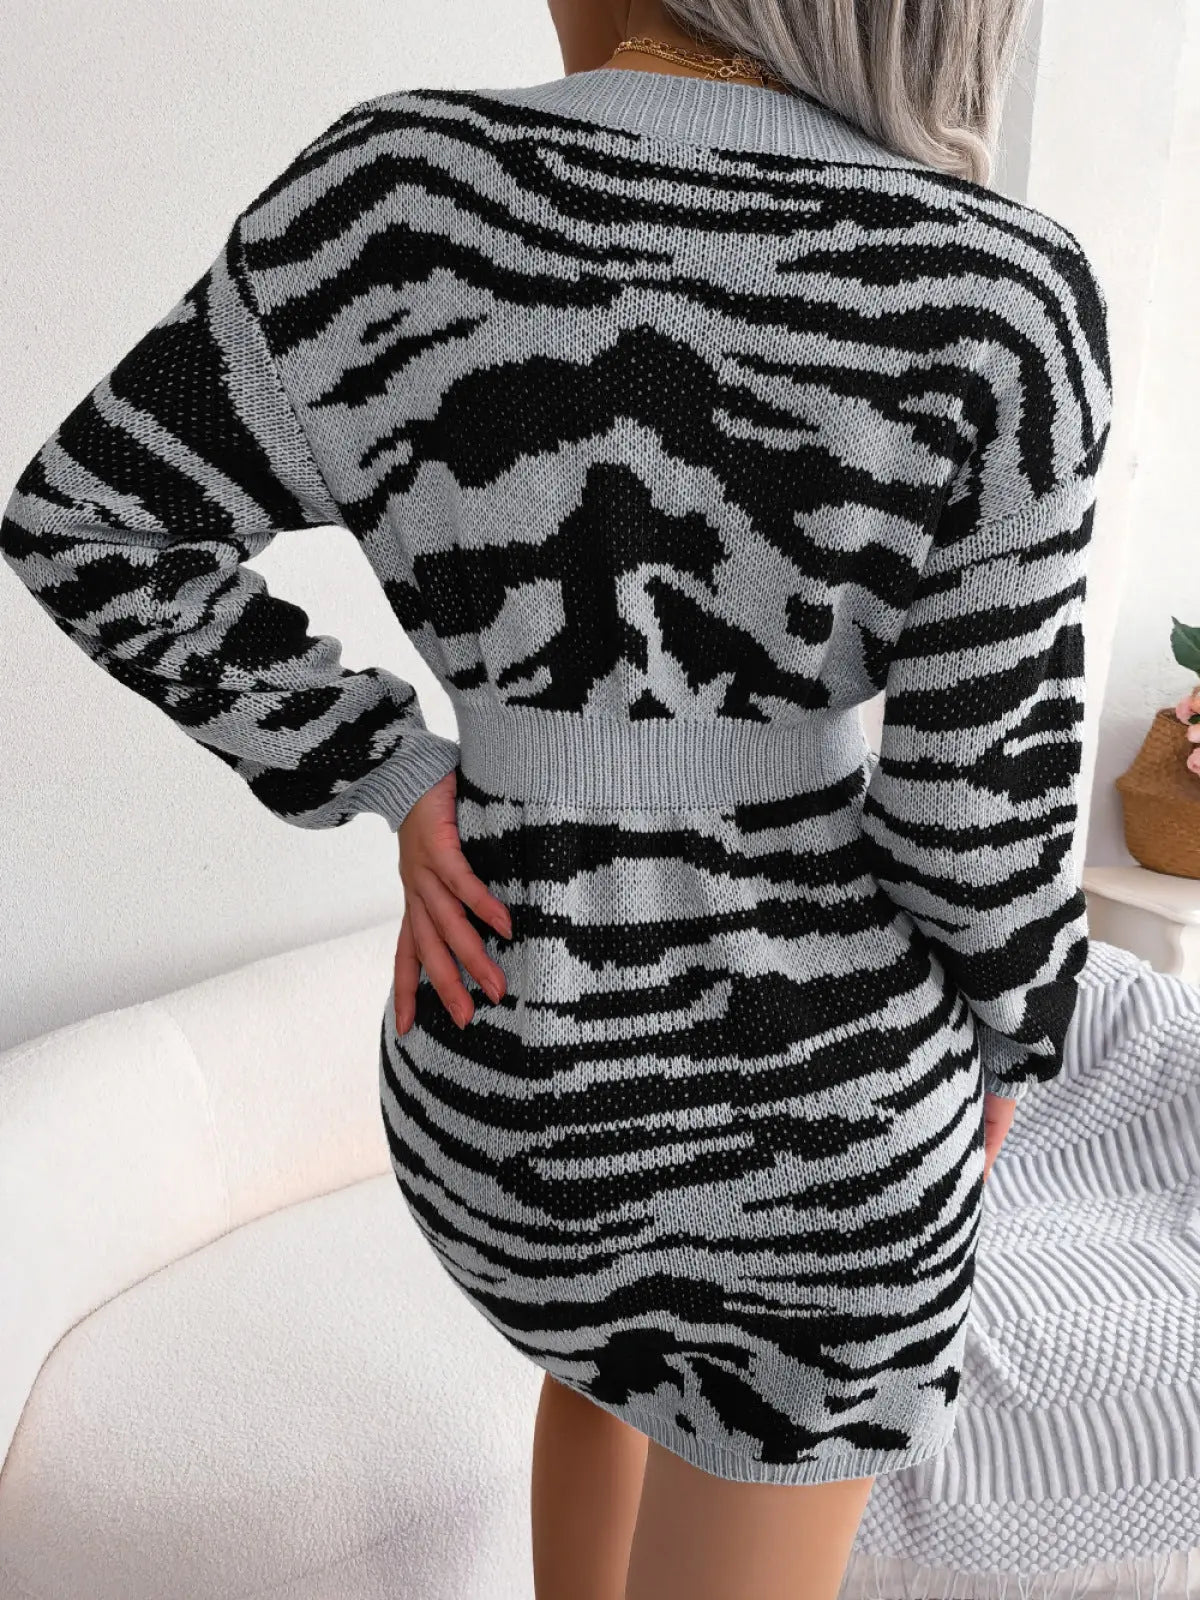 Tiger Pattern Cinched Waist Sweater Dress Rite Choice Clothing